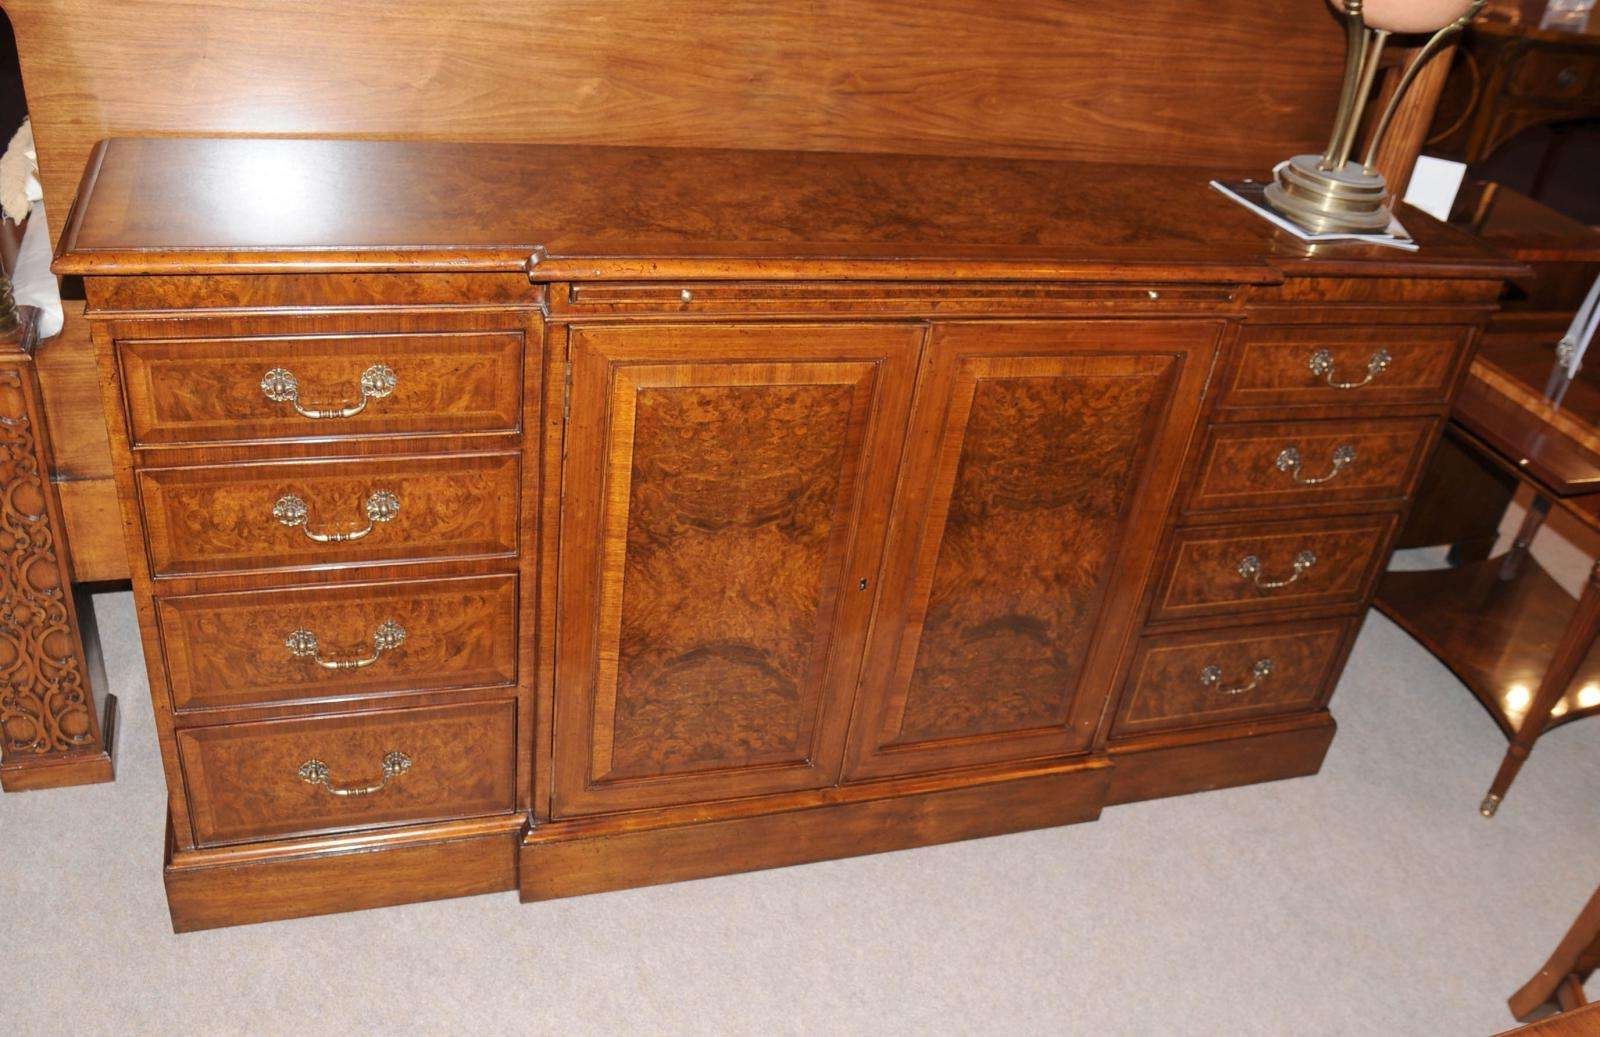 Edwardian Walnut Sideboard Buffet Server Dining Furniture | Ebay In Dining Room Servers And Sideboards (View 12 of 20)